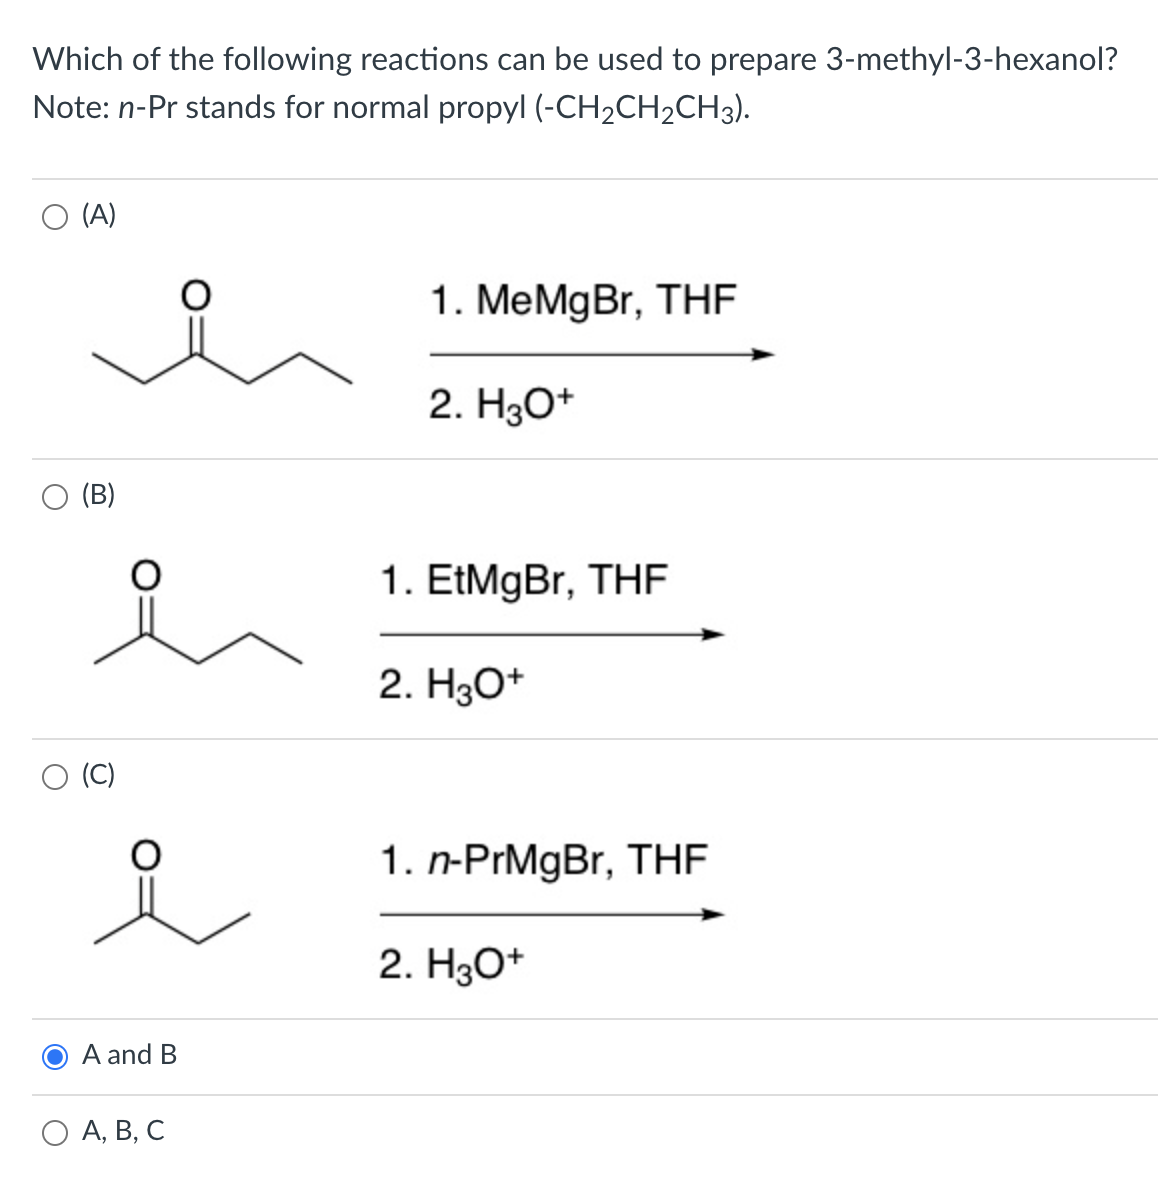 Which of the following reactions can be used to prepare 3-methyl-3-hexanol?
Note: n-Pr stands for normal propyl (-CH2CH2CH3).
(A)
1. MeMgBr, THF
2. H3O+
(B)
1. EtMgBr, THF
2. H30+
(C)
1. n-PrMgBr, THF
2. H30+
A and B
O A, B, C
